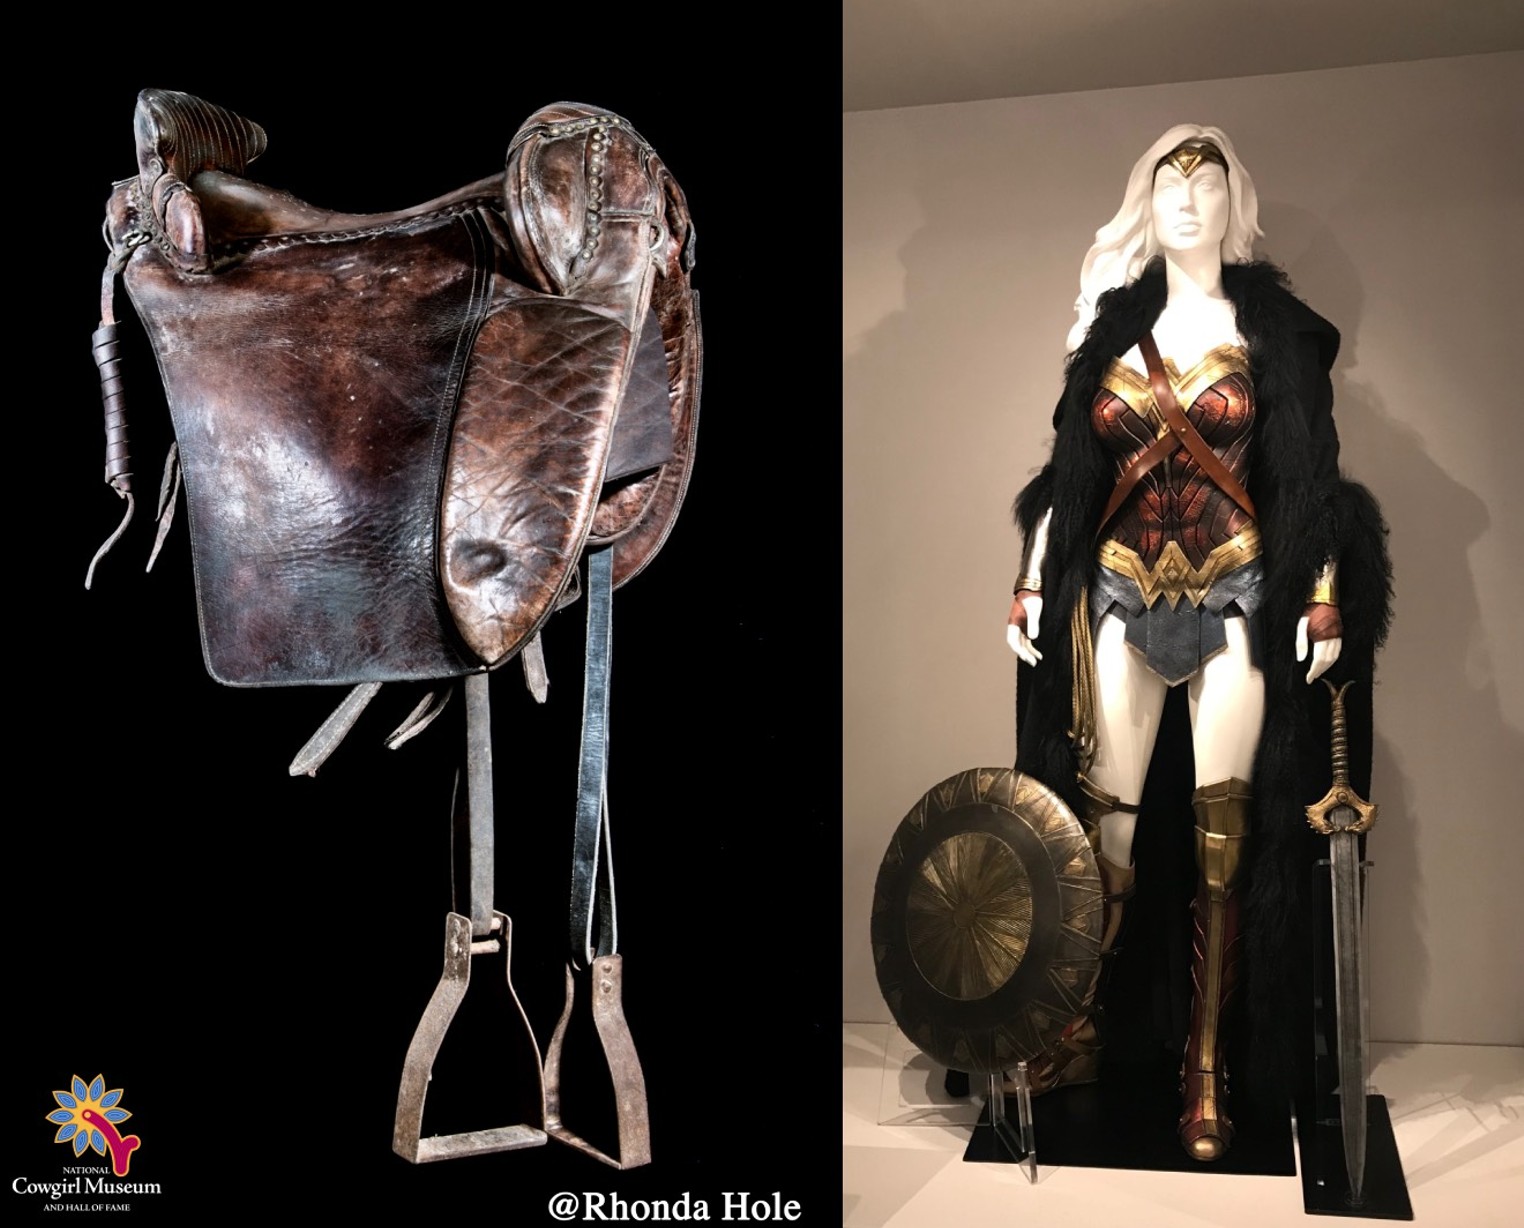 The National Cowgirl Museum Has A Wonder Woman Costume And Jon Snows